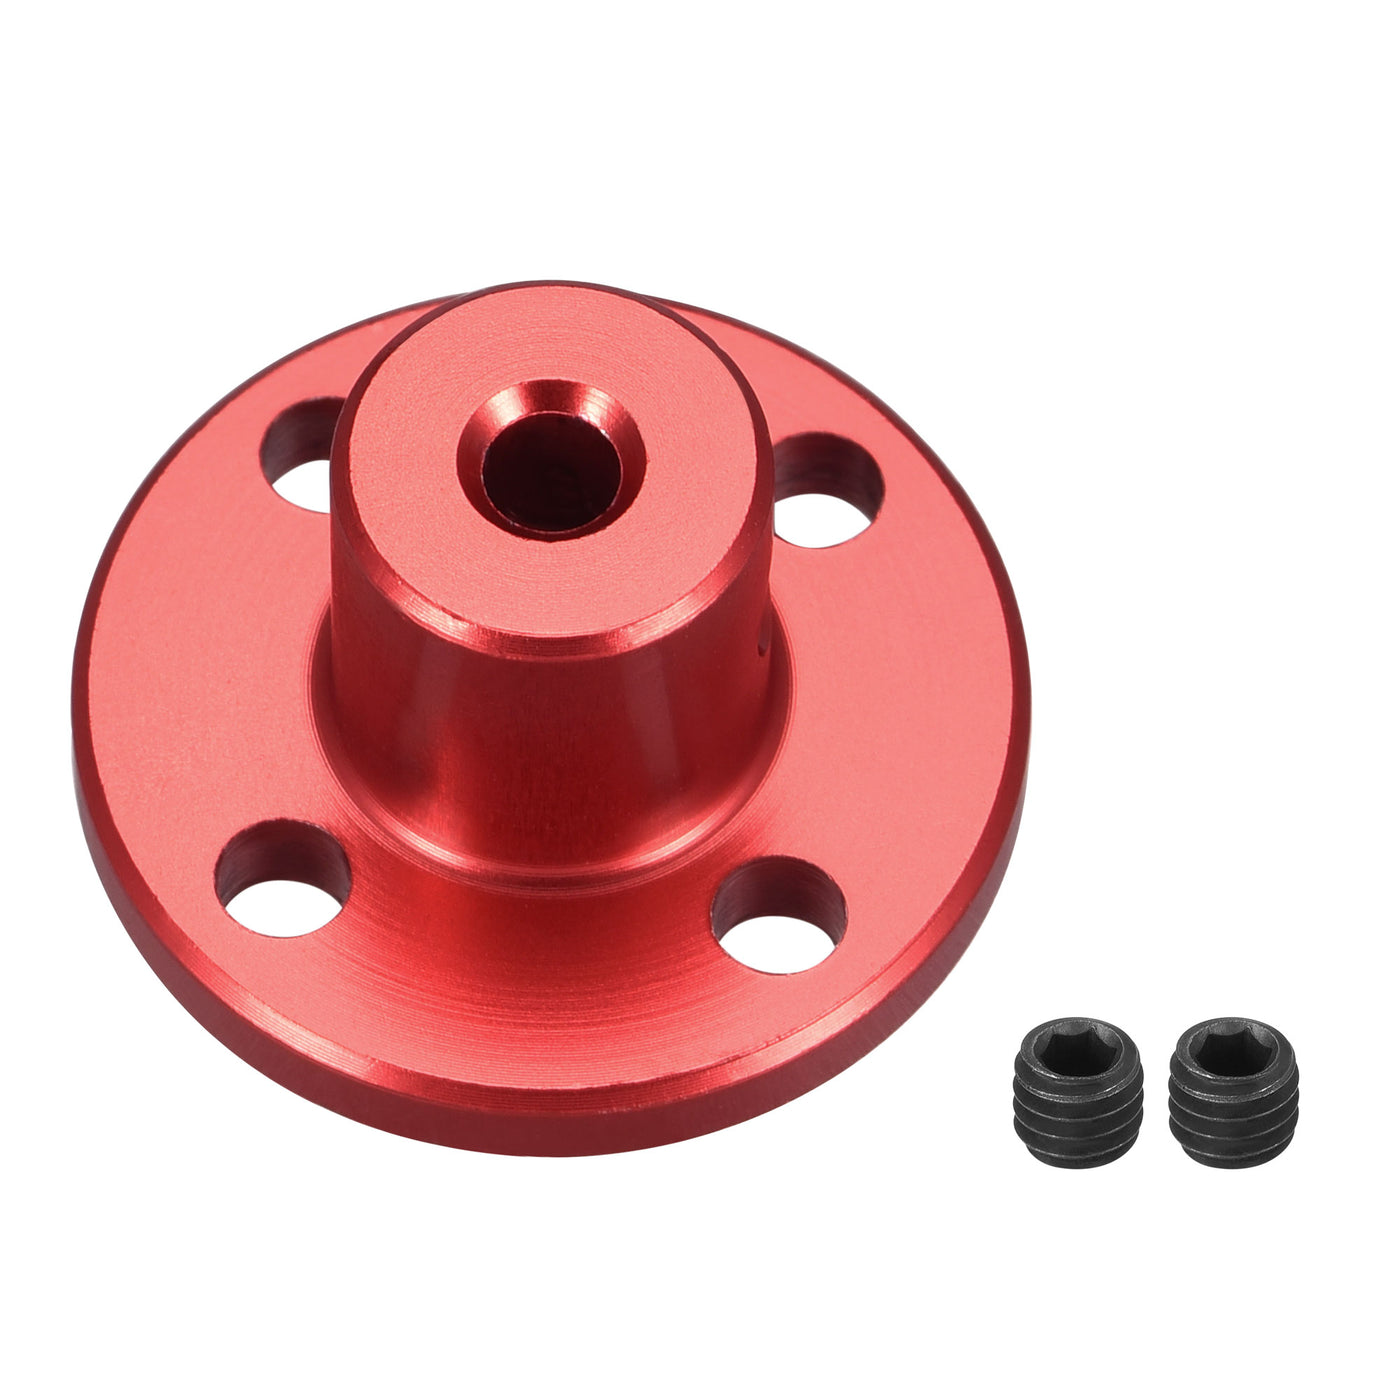 Uxcell Uxcell 3mm Dia H13xD10 Rigid Flange Coupling Motor Shaft Coupler DIY Red